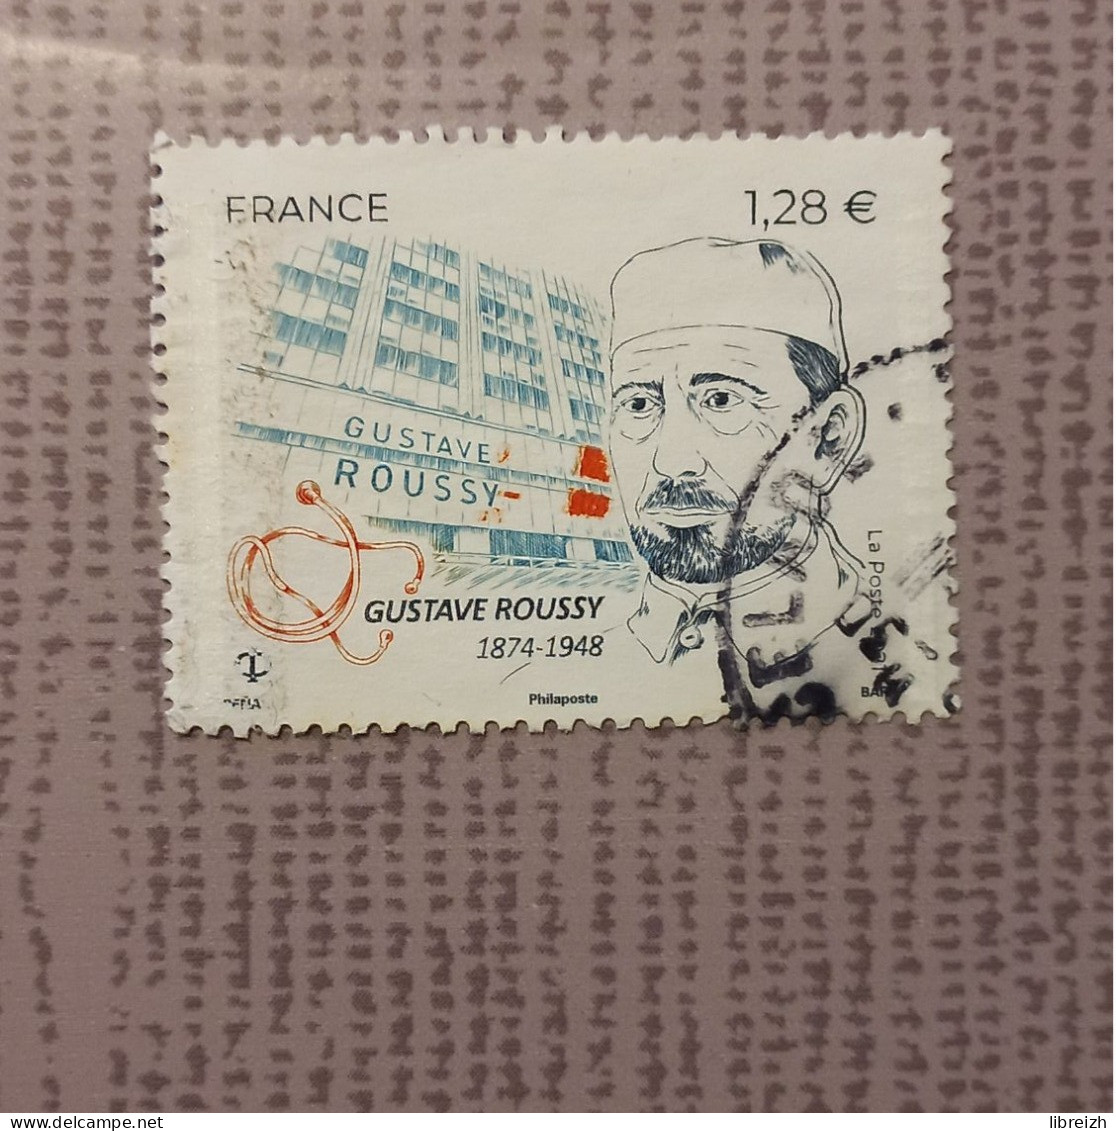 Gustave Roussy  N° 5521  Année 2021 ( Cachet Rond ) - Usati